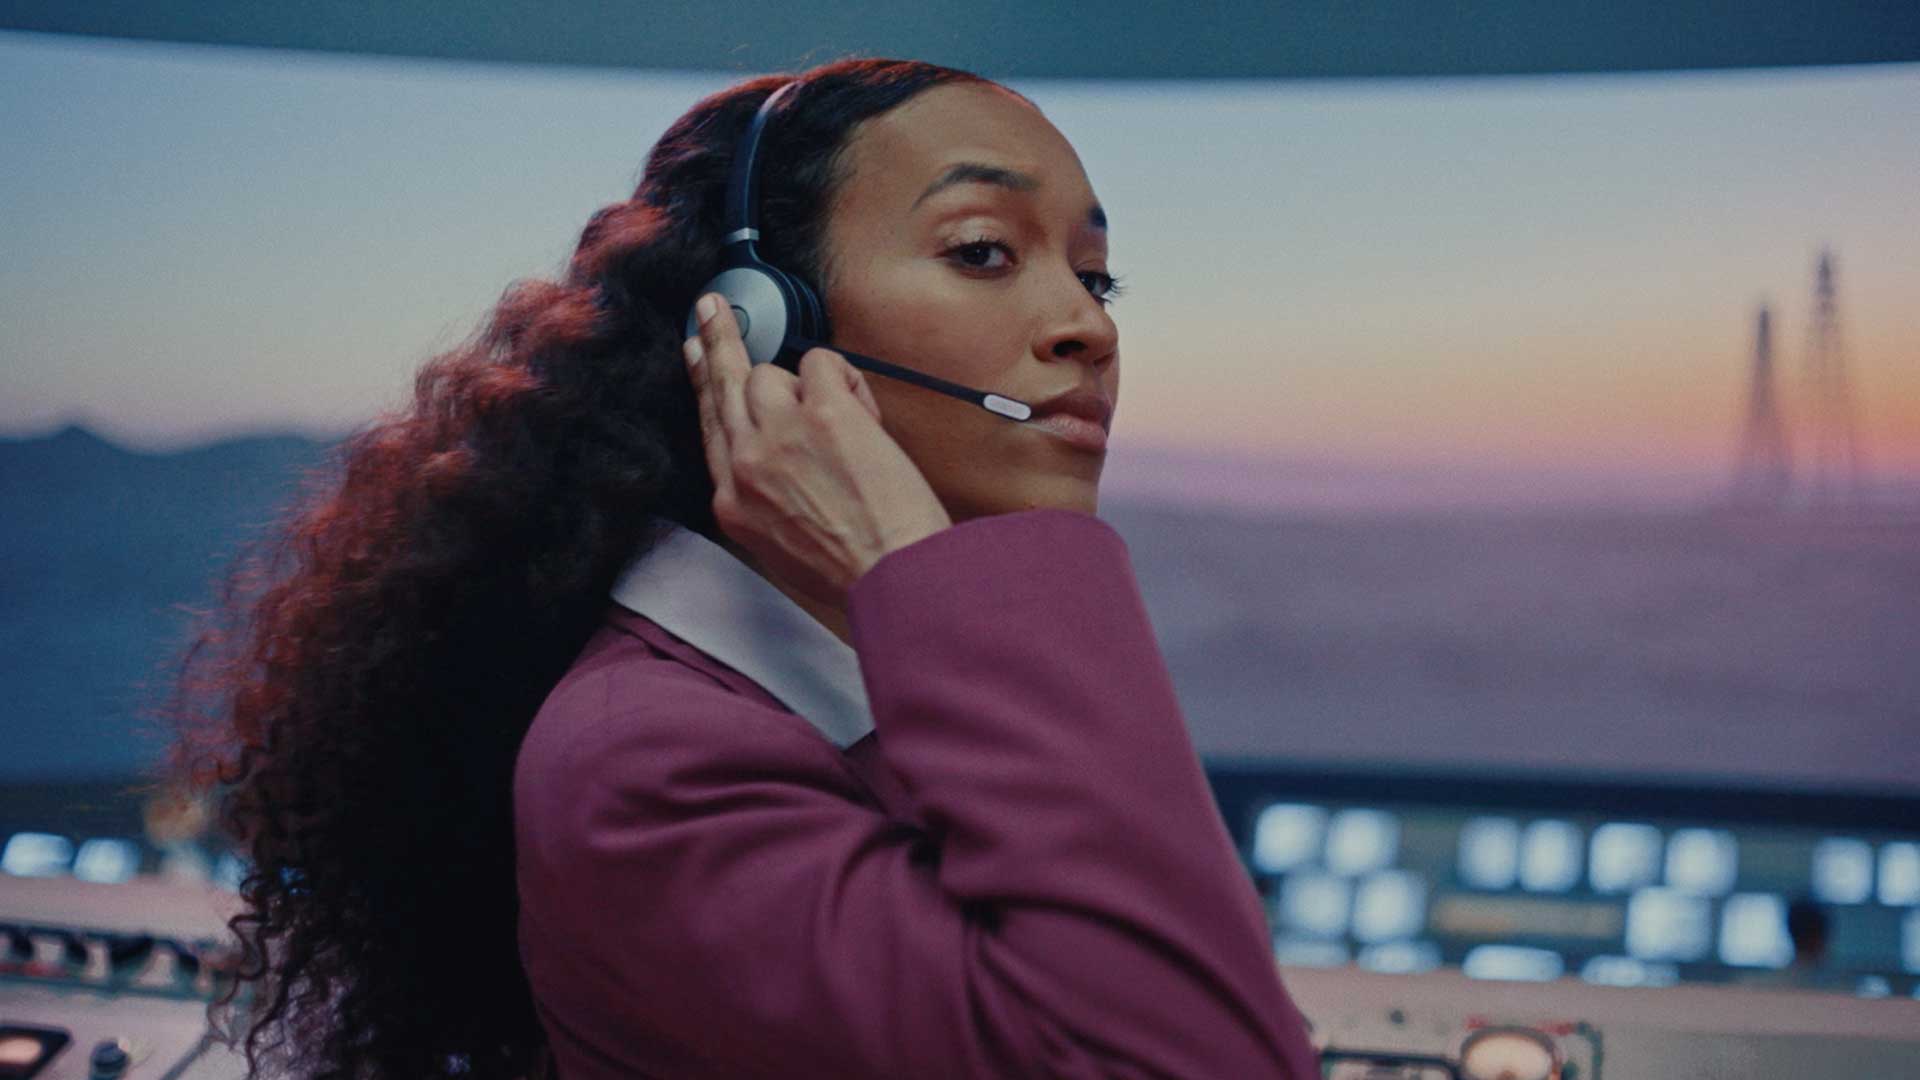 Still from John Deere's All Kinds of Fields spot of Maya wearing a headset in front of a rocket launch site mission control.